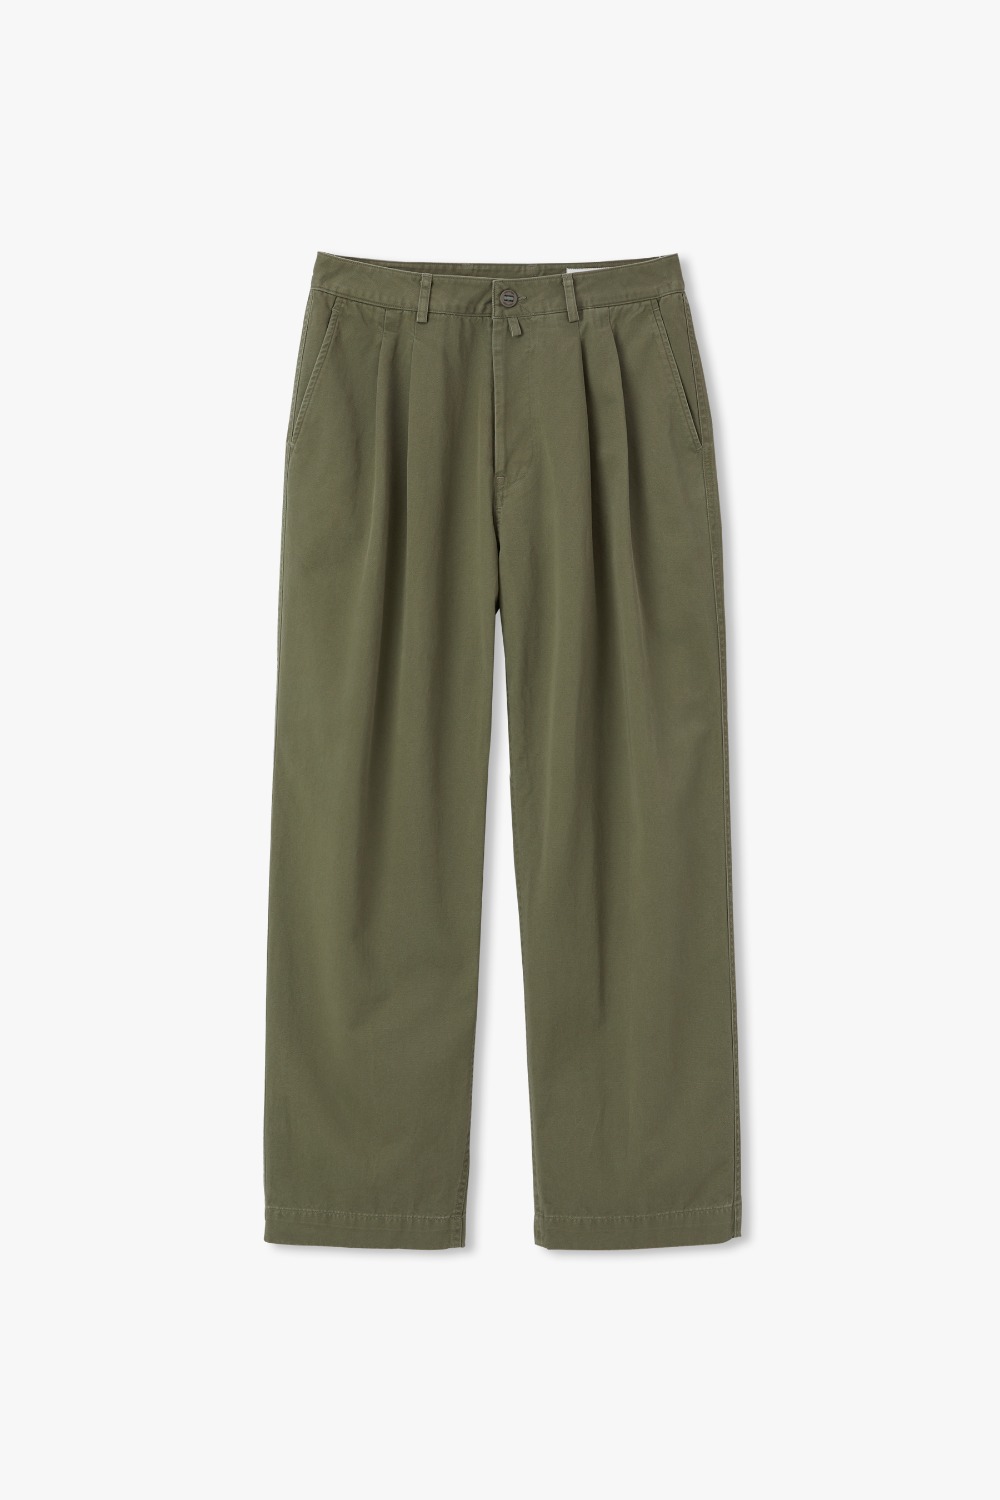 MOSS GREEN YRS Y-550 WASHED WIDE CHINO PANTS (ECP GARMENT PROCESS)